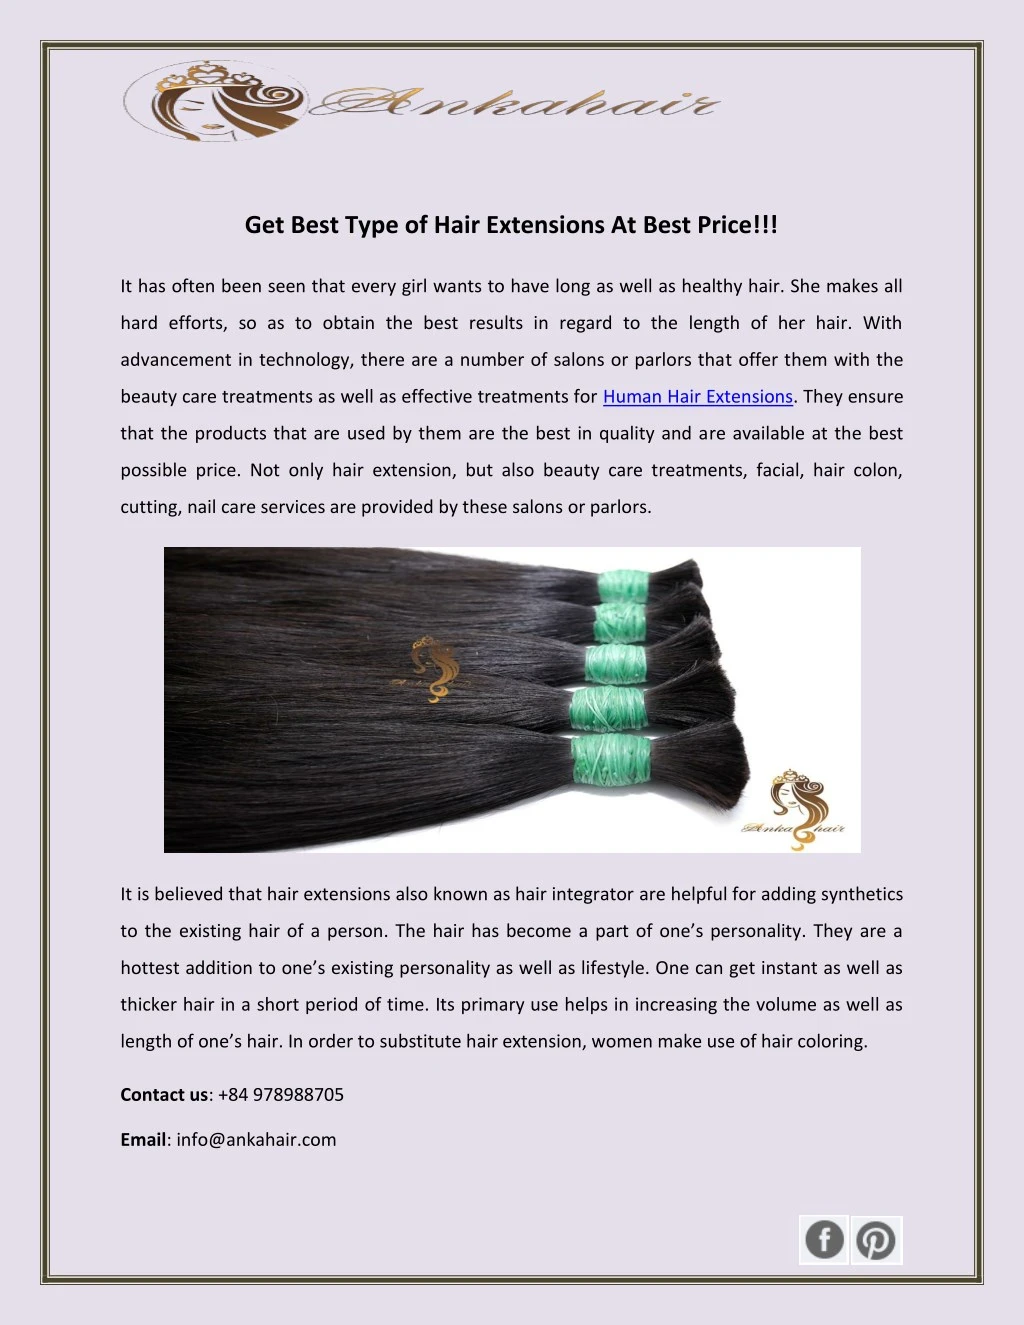 get best type of hair extensions at best price